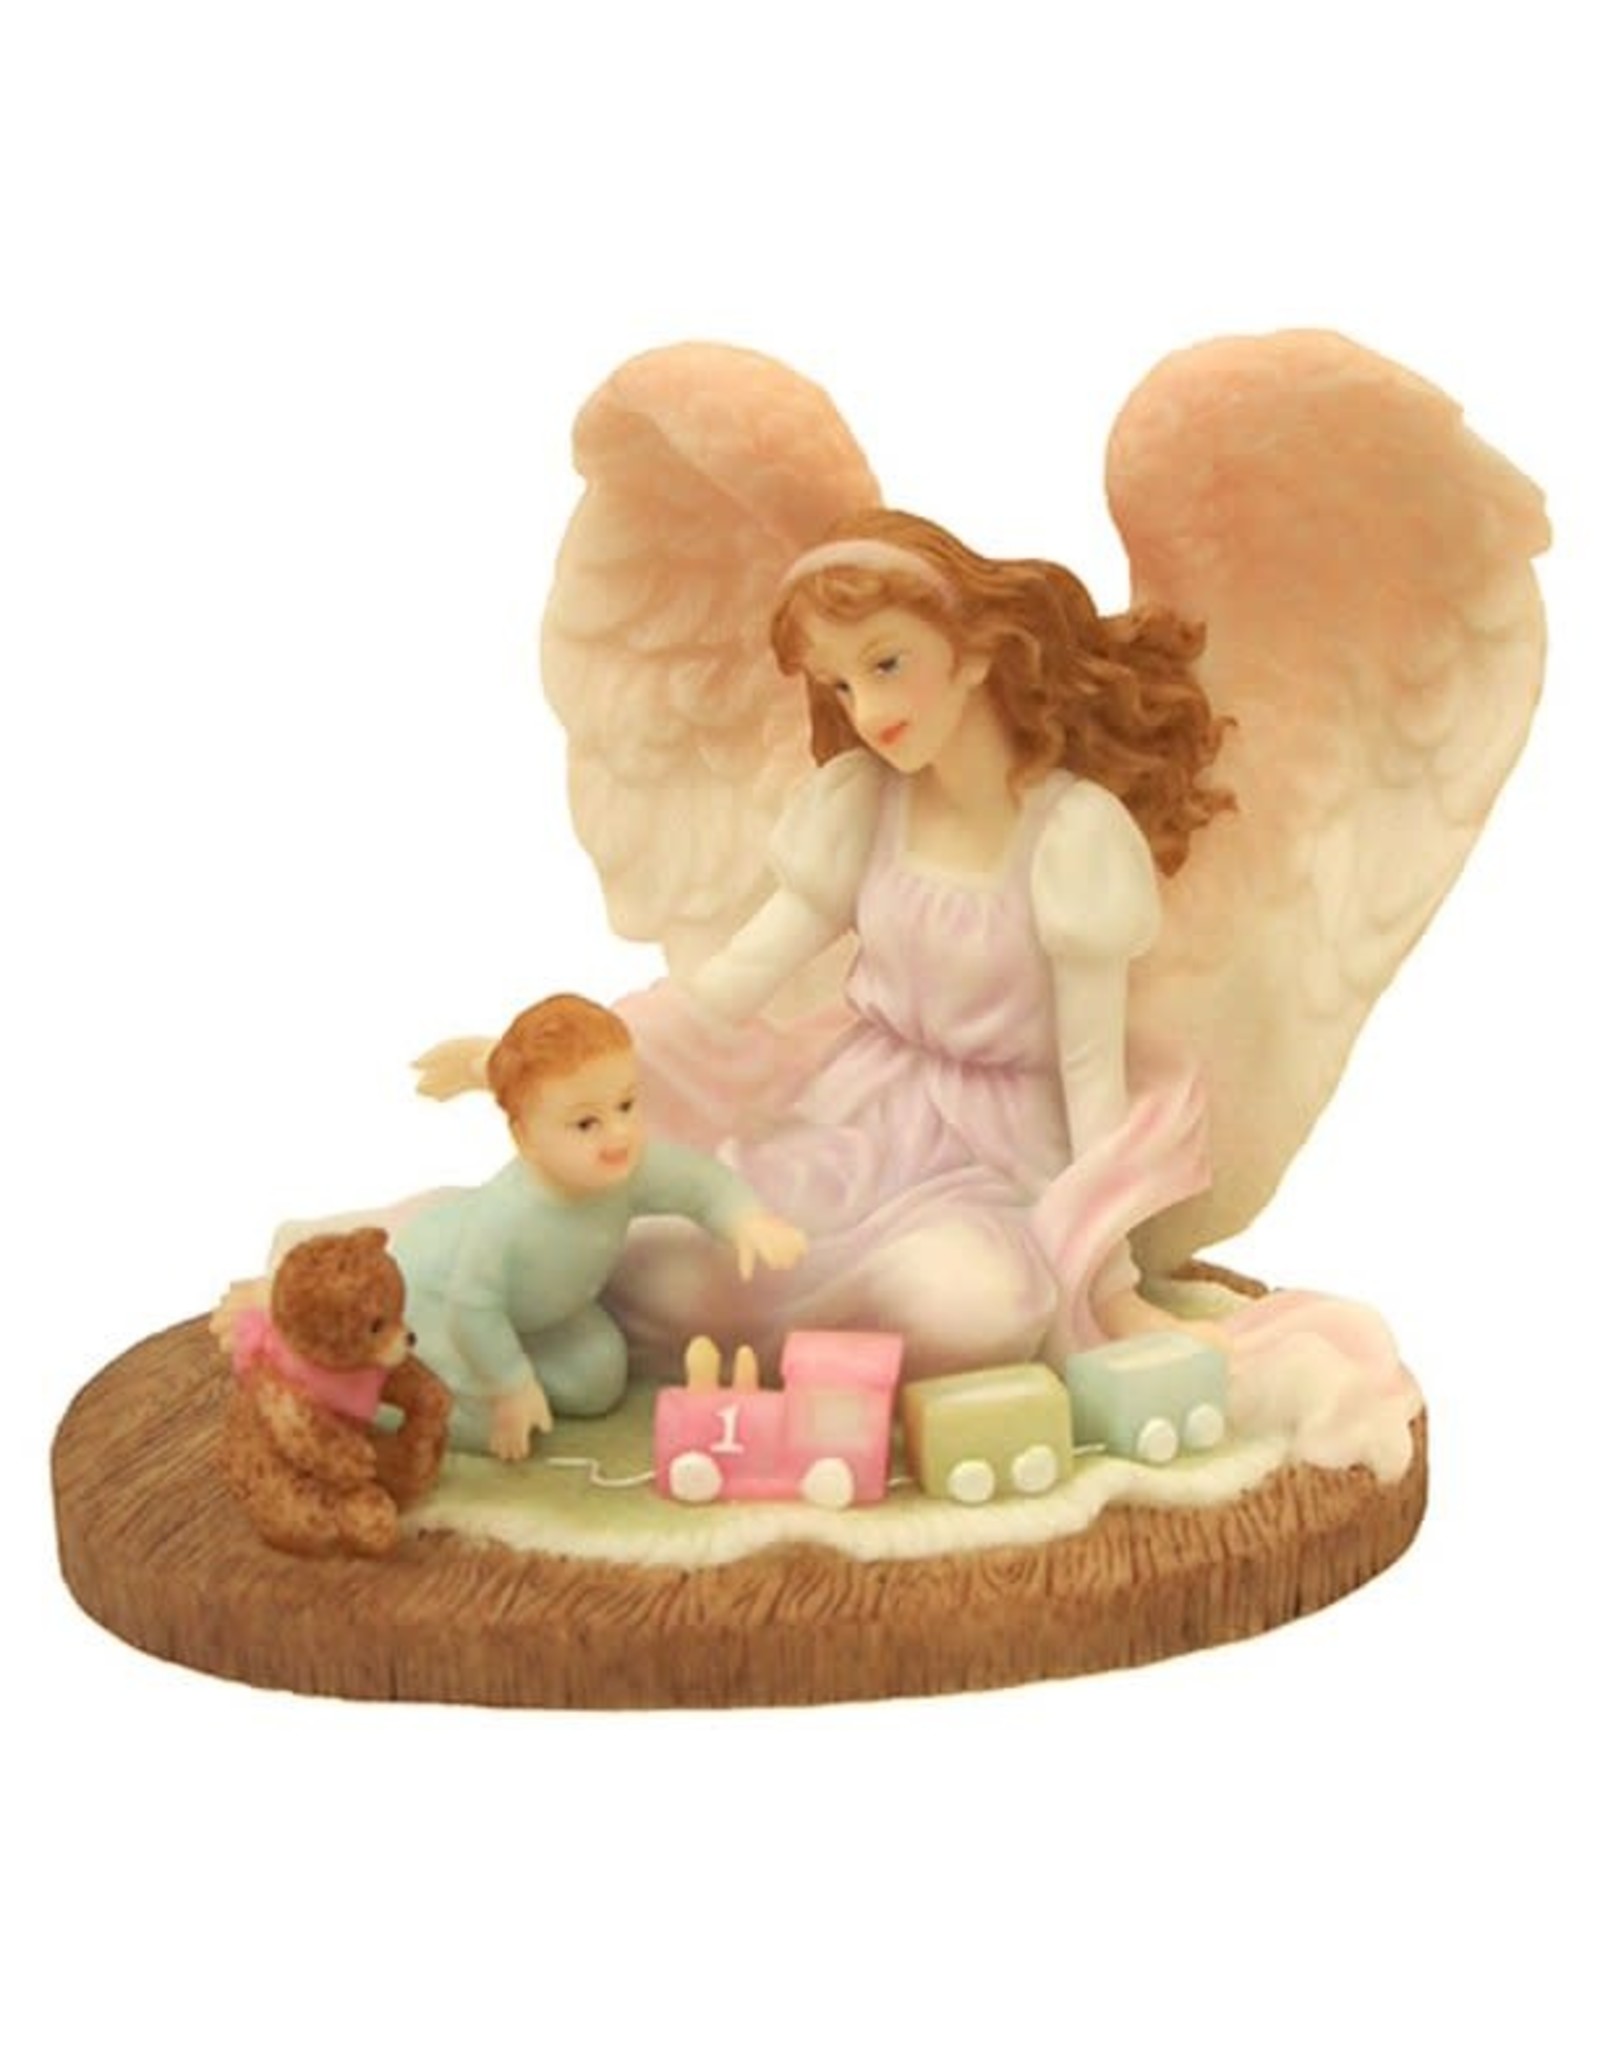 Roman Angels to Watch Over Me, 1-Year Old Boy Figurine